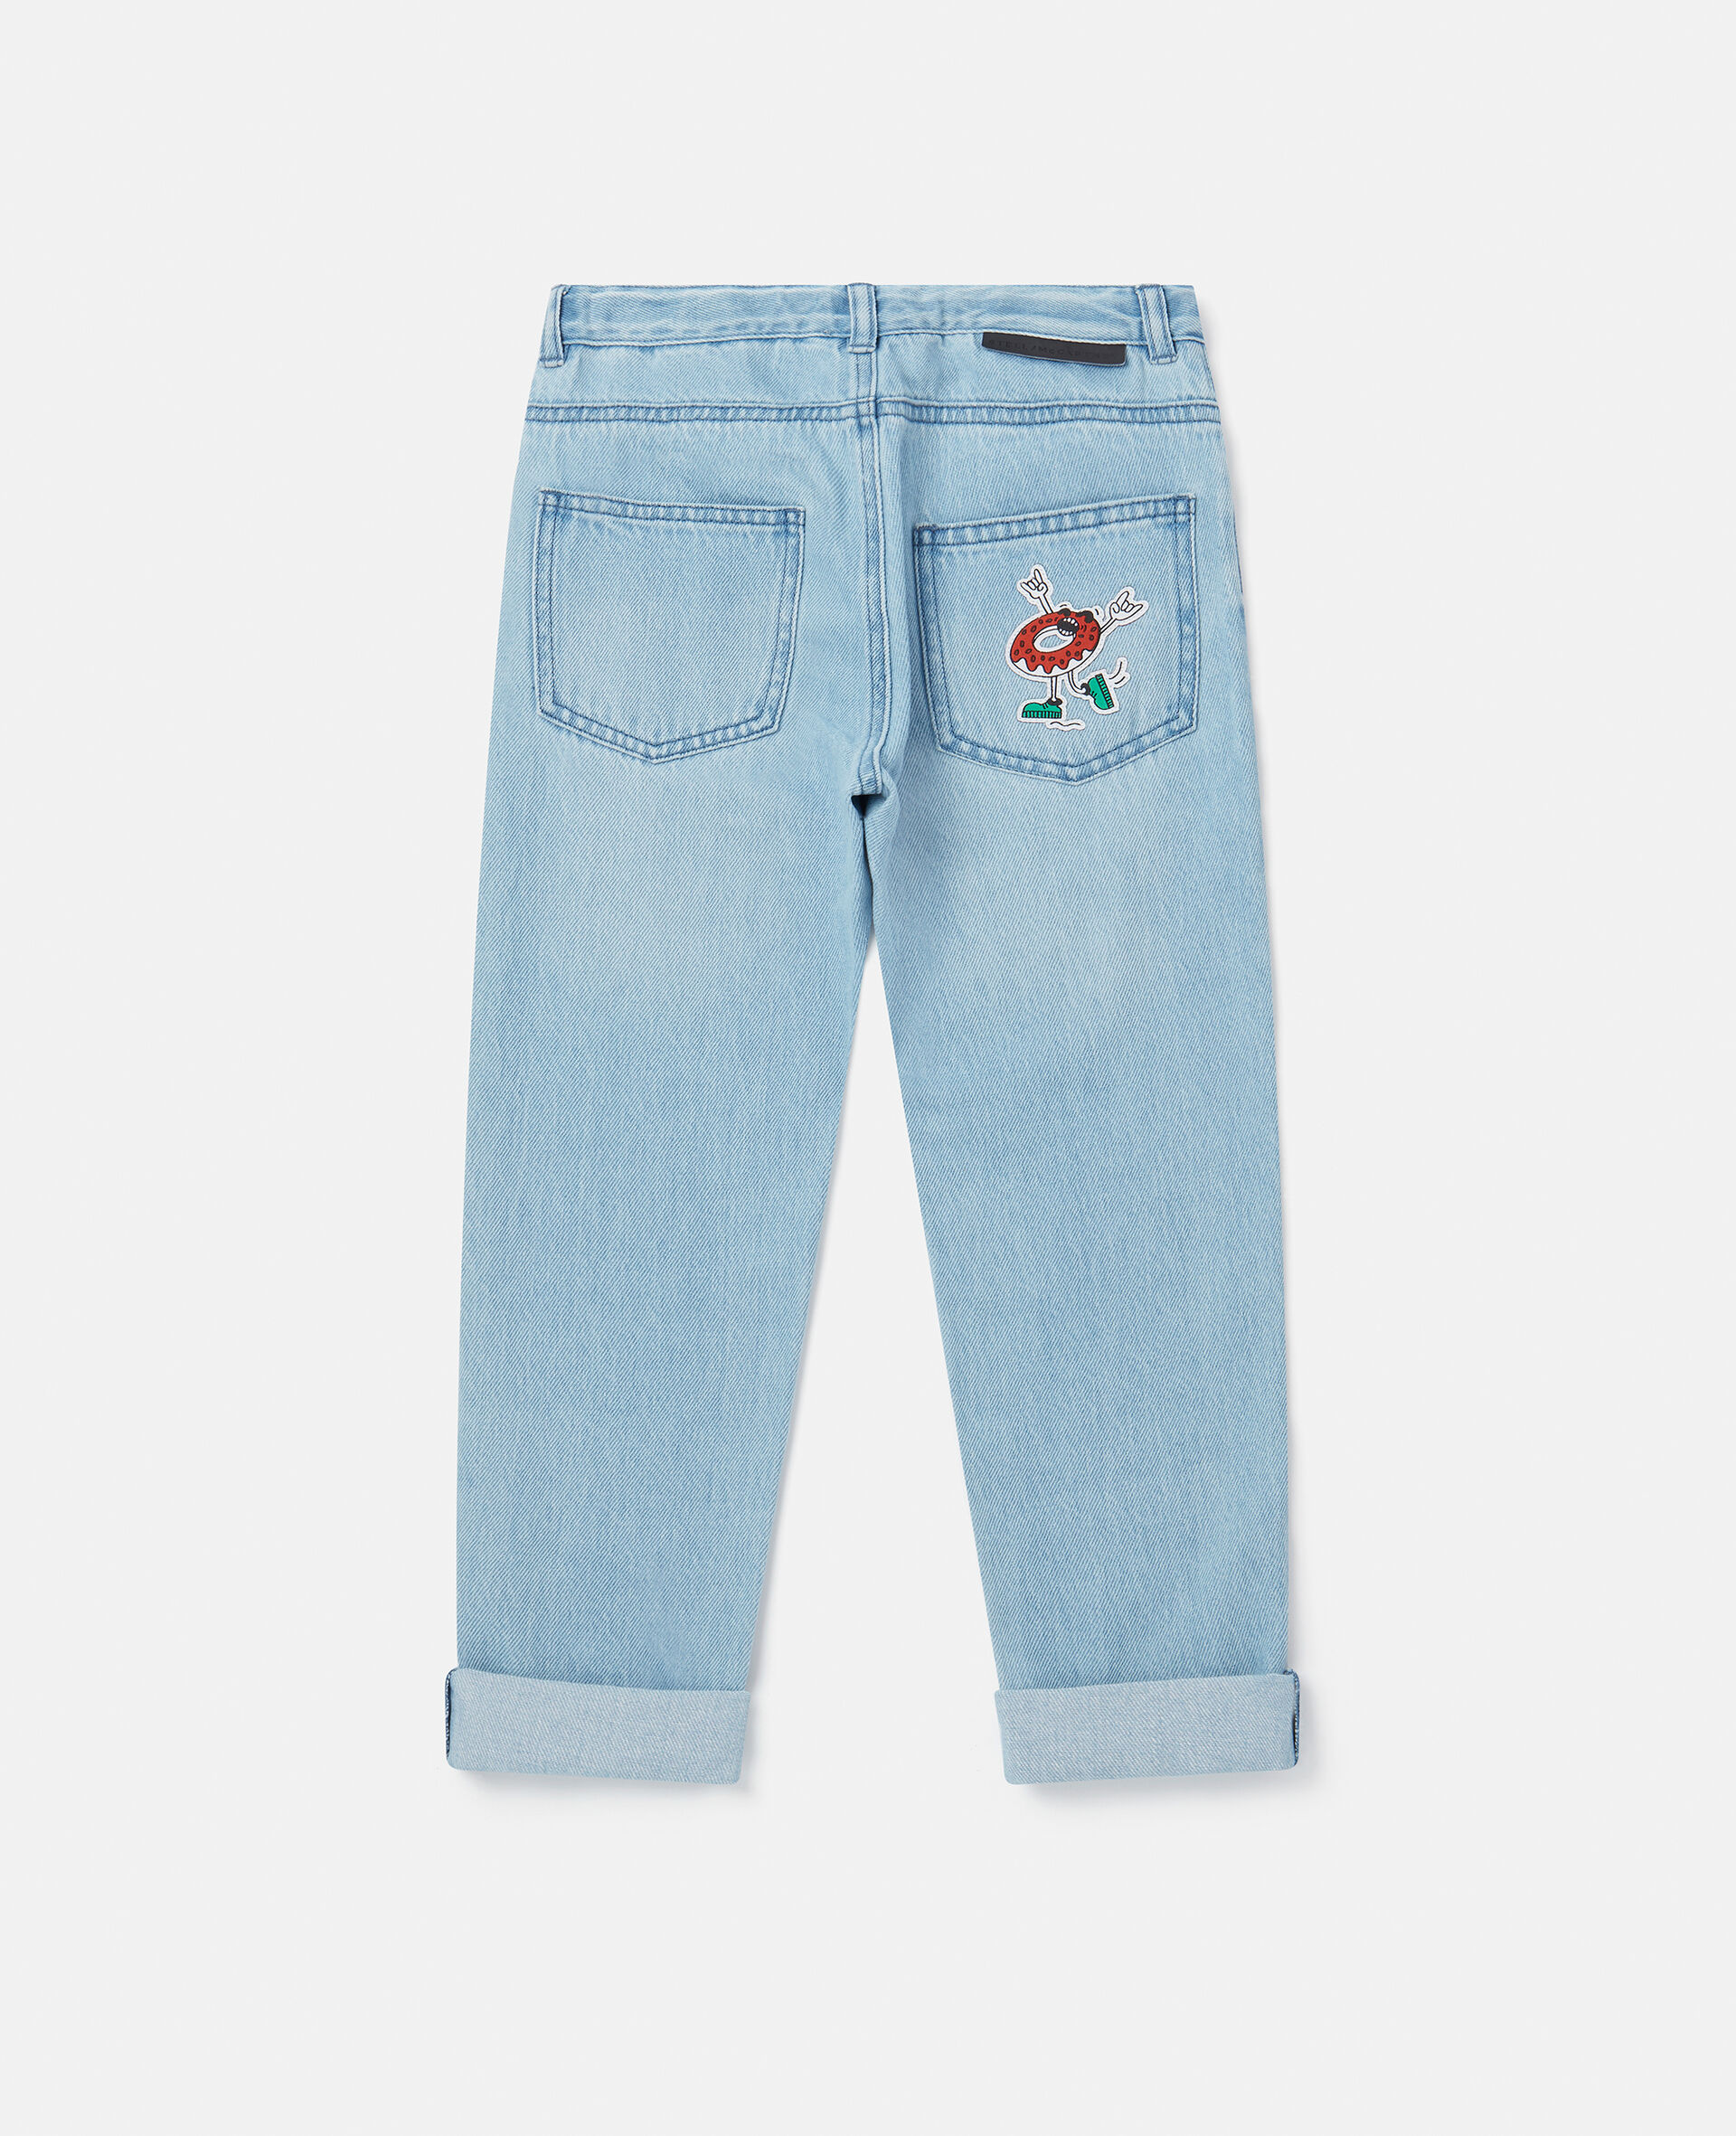 Fast Food Embroidery Boyfriend Jeans-Multicolour-large image number 2